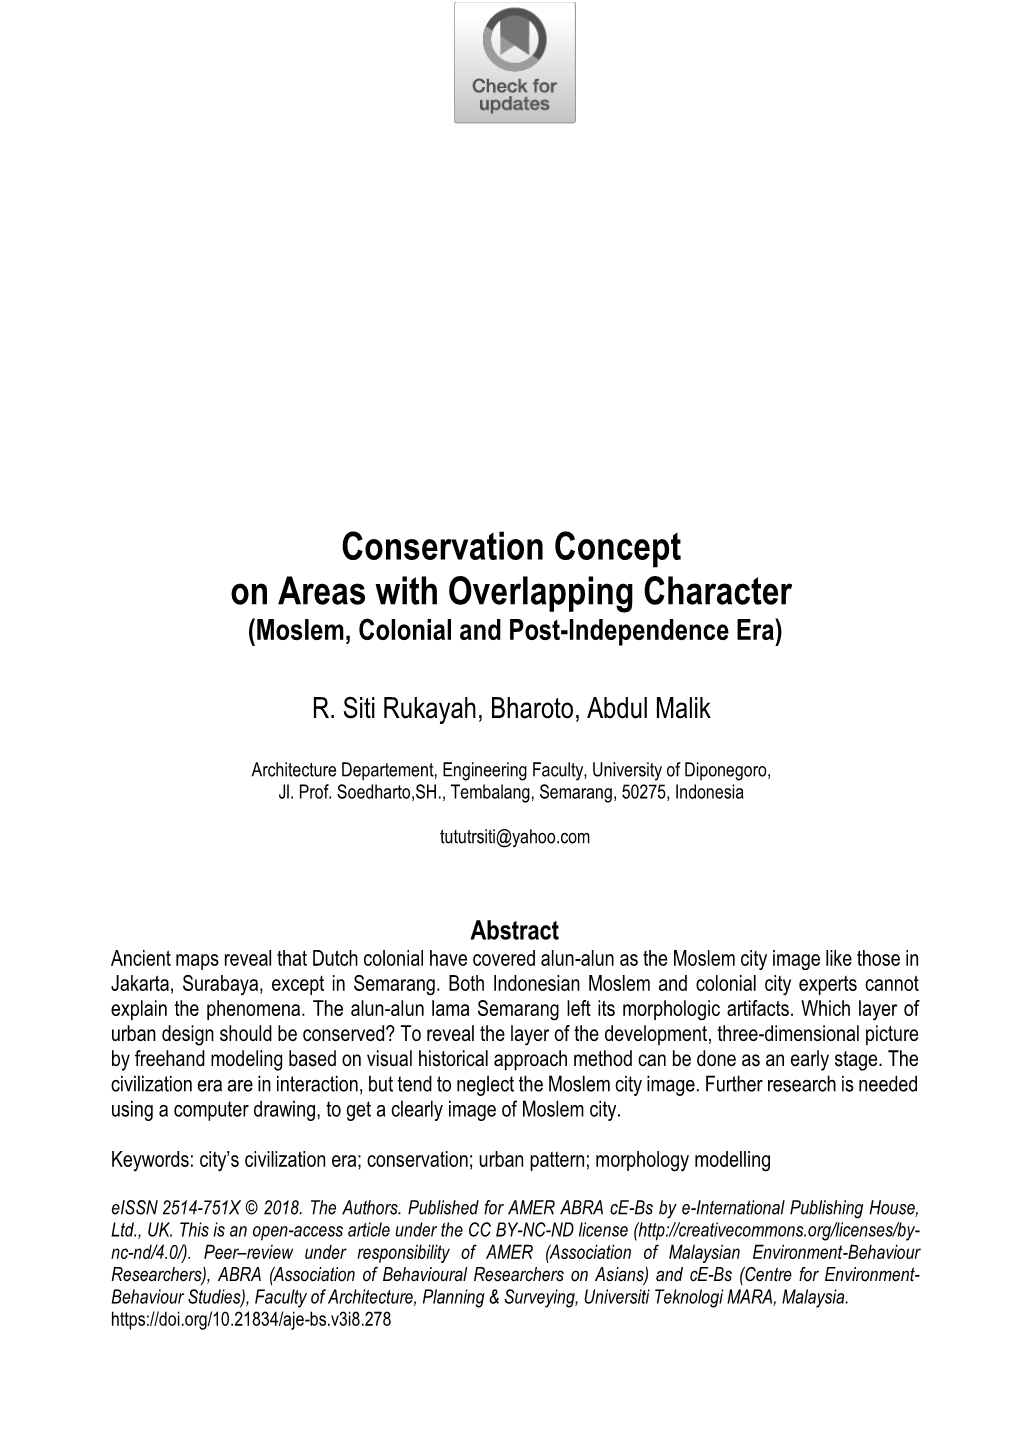 Conservation Concept on Areas with Overlapping Character (Moslem, Colonial and Post-Independence Era)